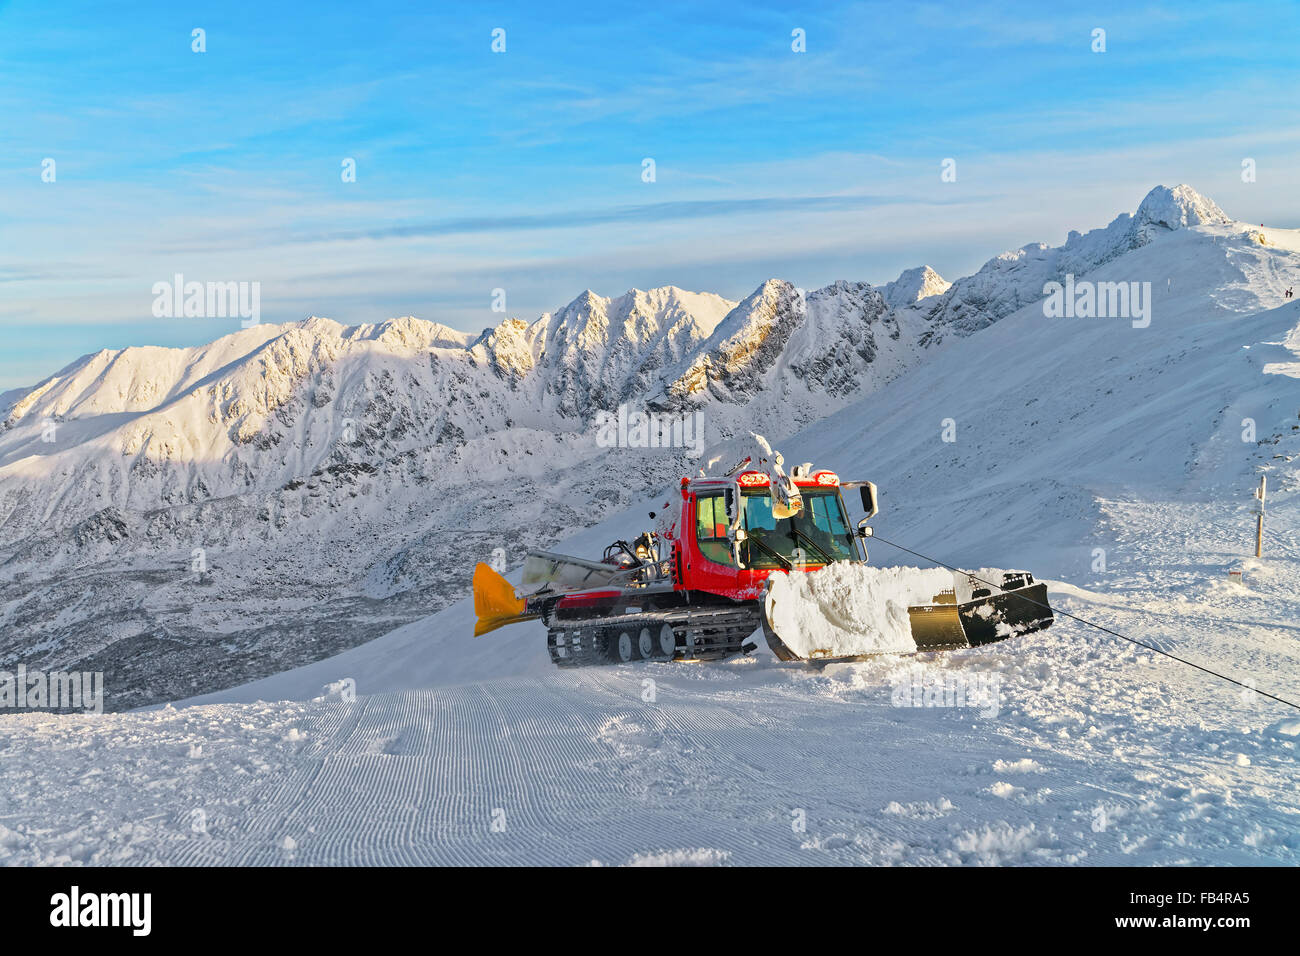 Ratrack at work on Kasprowy Wierch of Zakopane in winter. Zakopane is a town in Poland in Tatra Mountains.Kasprowy Wierch is a mountain in Zakopane and the most popular ski area in Poland Stock Photo